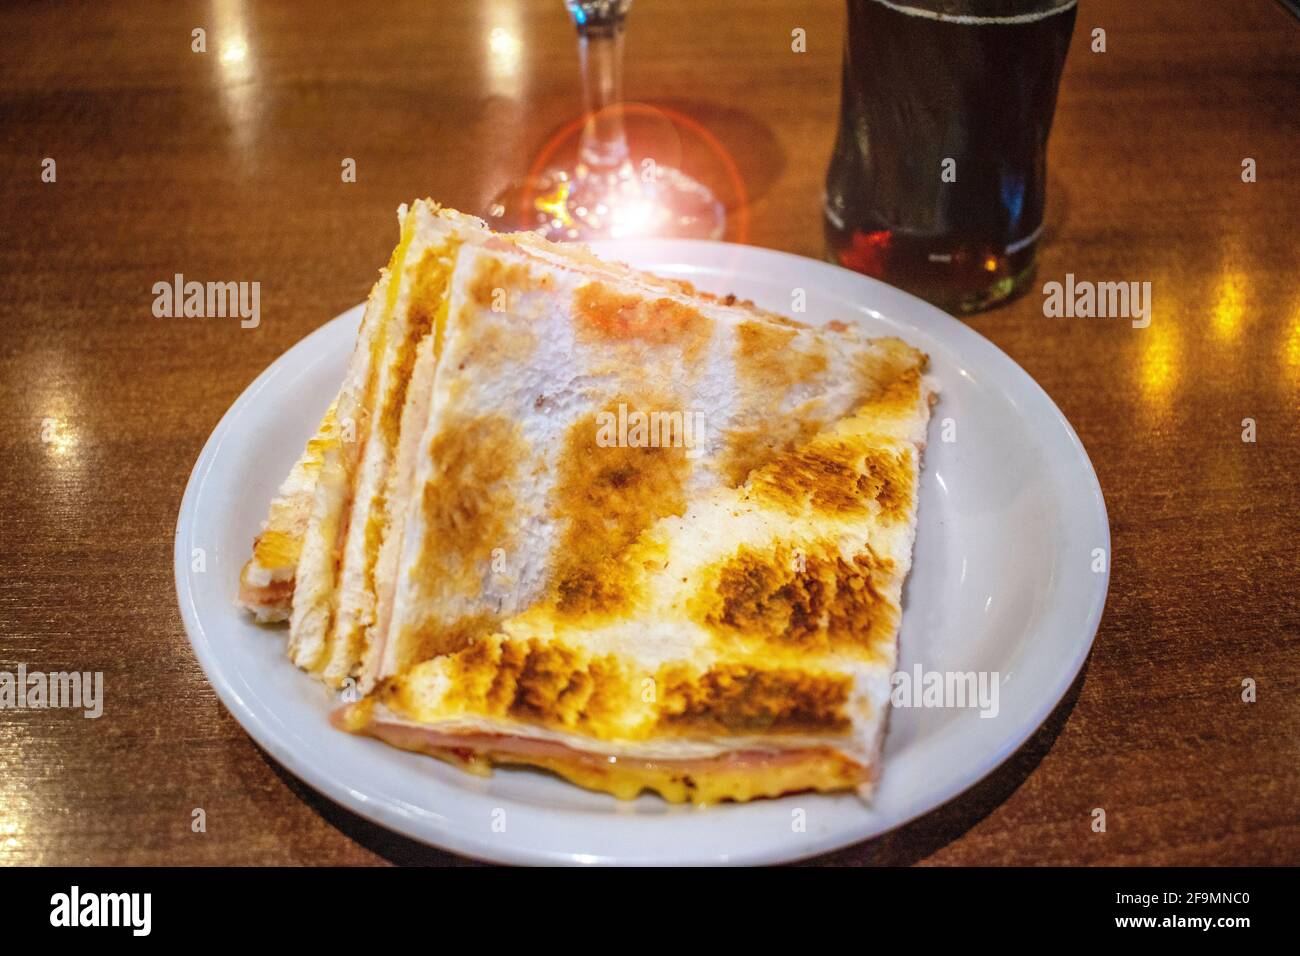 Carlito of ham and cheese (typical toast from Rosario, Argentina). Stock Photo